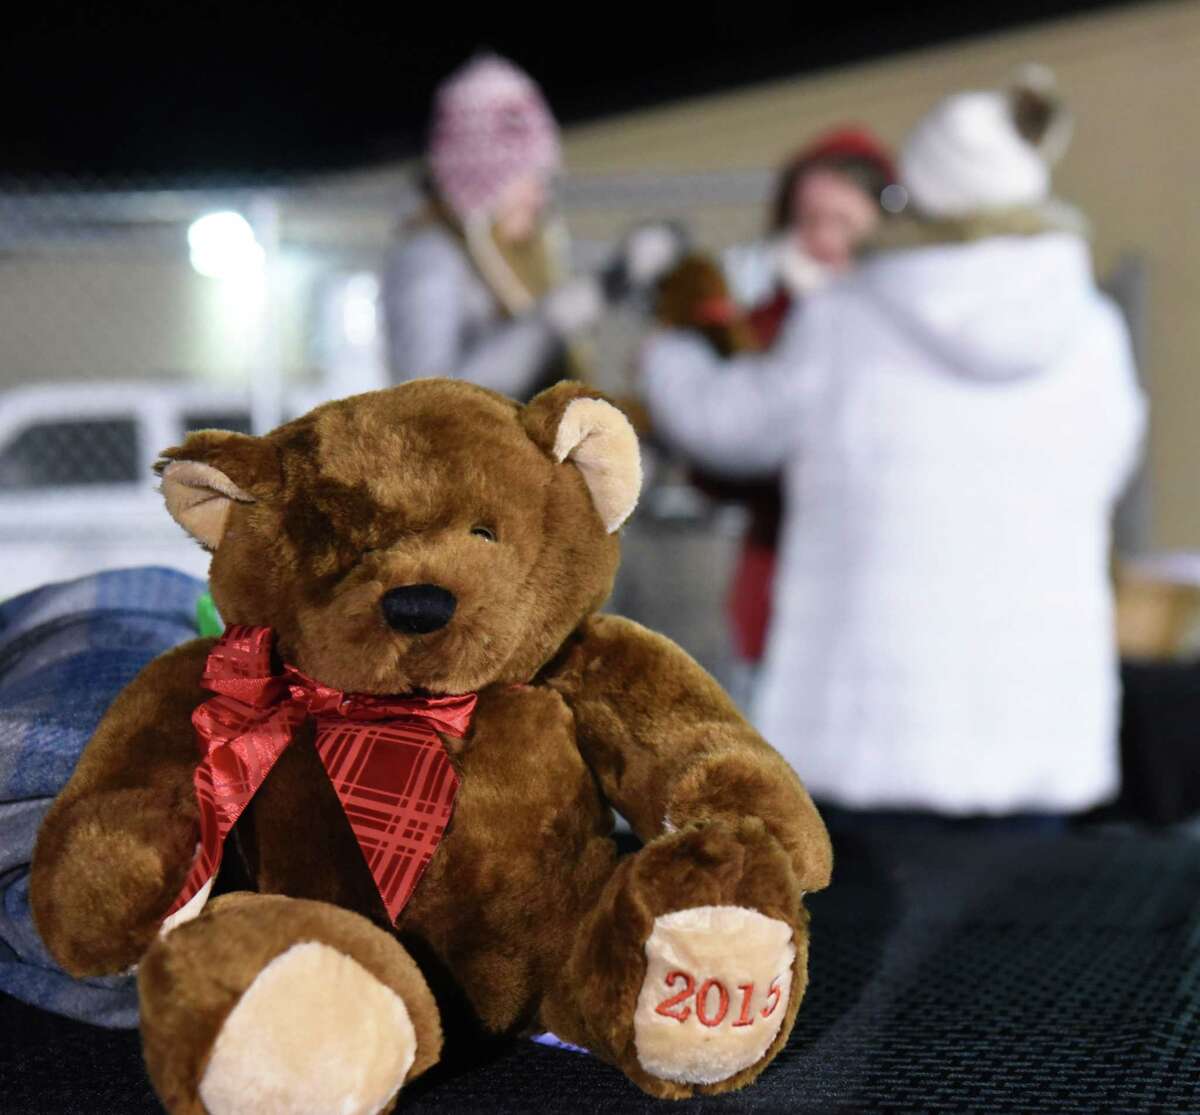 Buddy Blankets & Bears charity hands out blankets and Emma bears to people as they arrive to attend a vigil to honor seventh-grader Emma Jones at the Ballston Spa High School football field on Tuesday, Dec. 18, 2018 in Ballston Spa, N.Y. Jones was killed as part of what police say was a murder-suicide. (Lori Van Buren/Times Union)